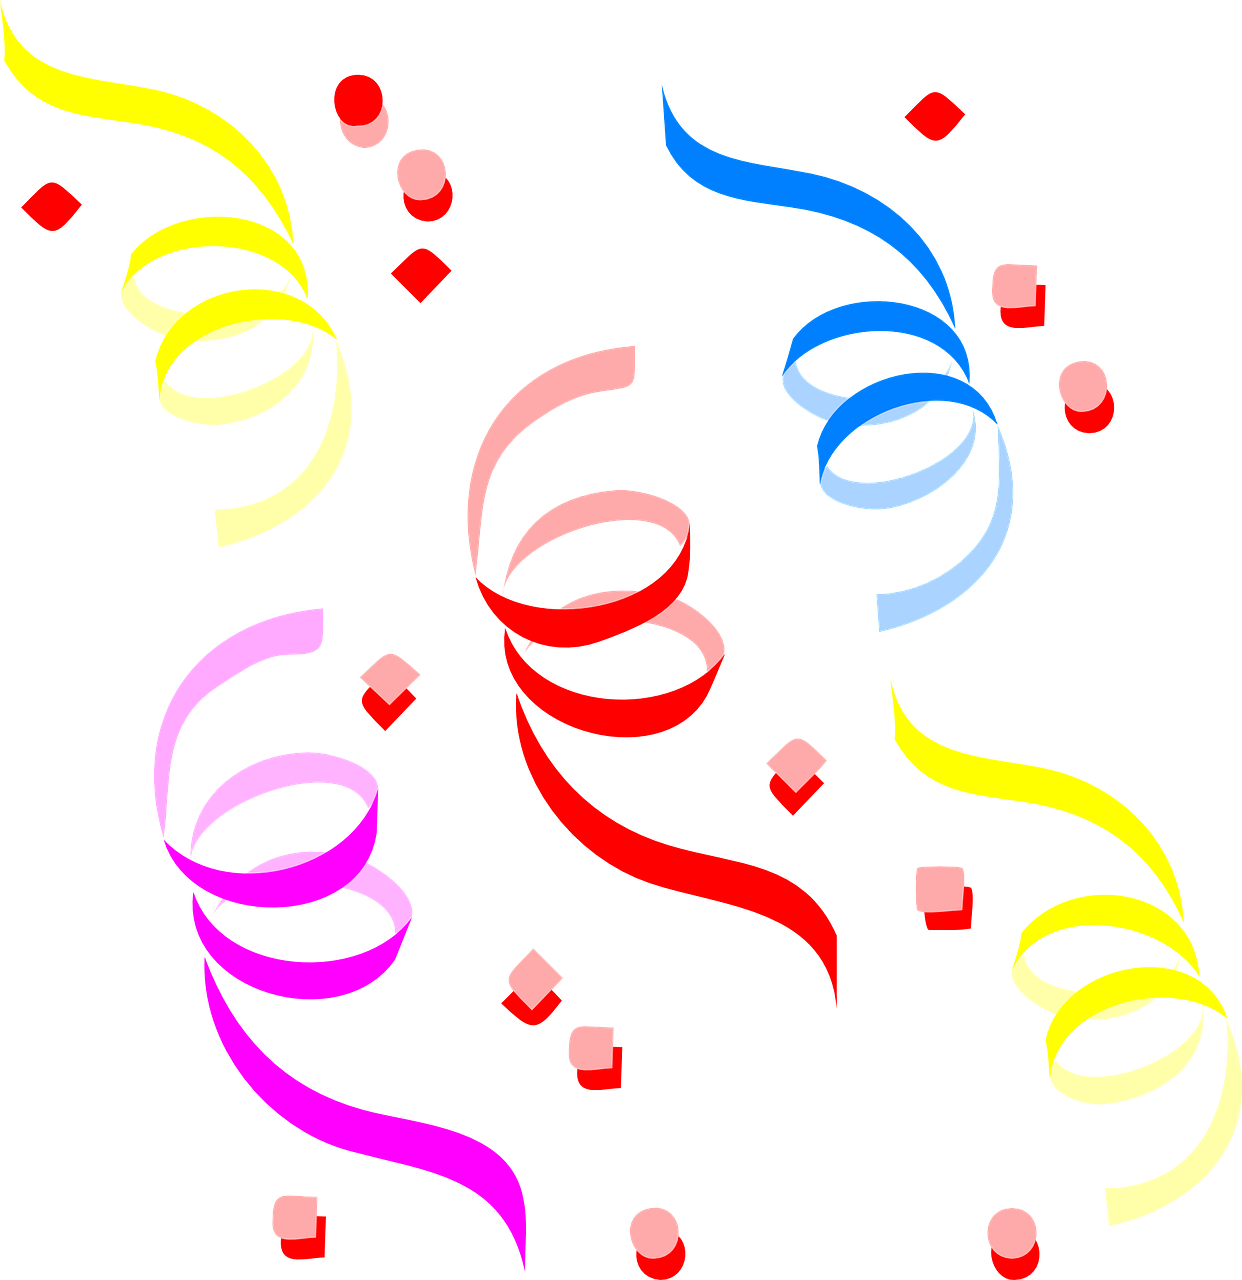 a group of ribbons and confetti on a black background, computer art, color dnd illustration, twirly, new years eve, cutie mark